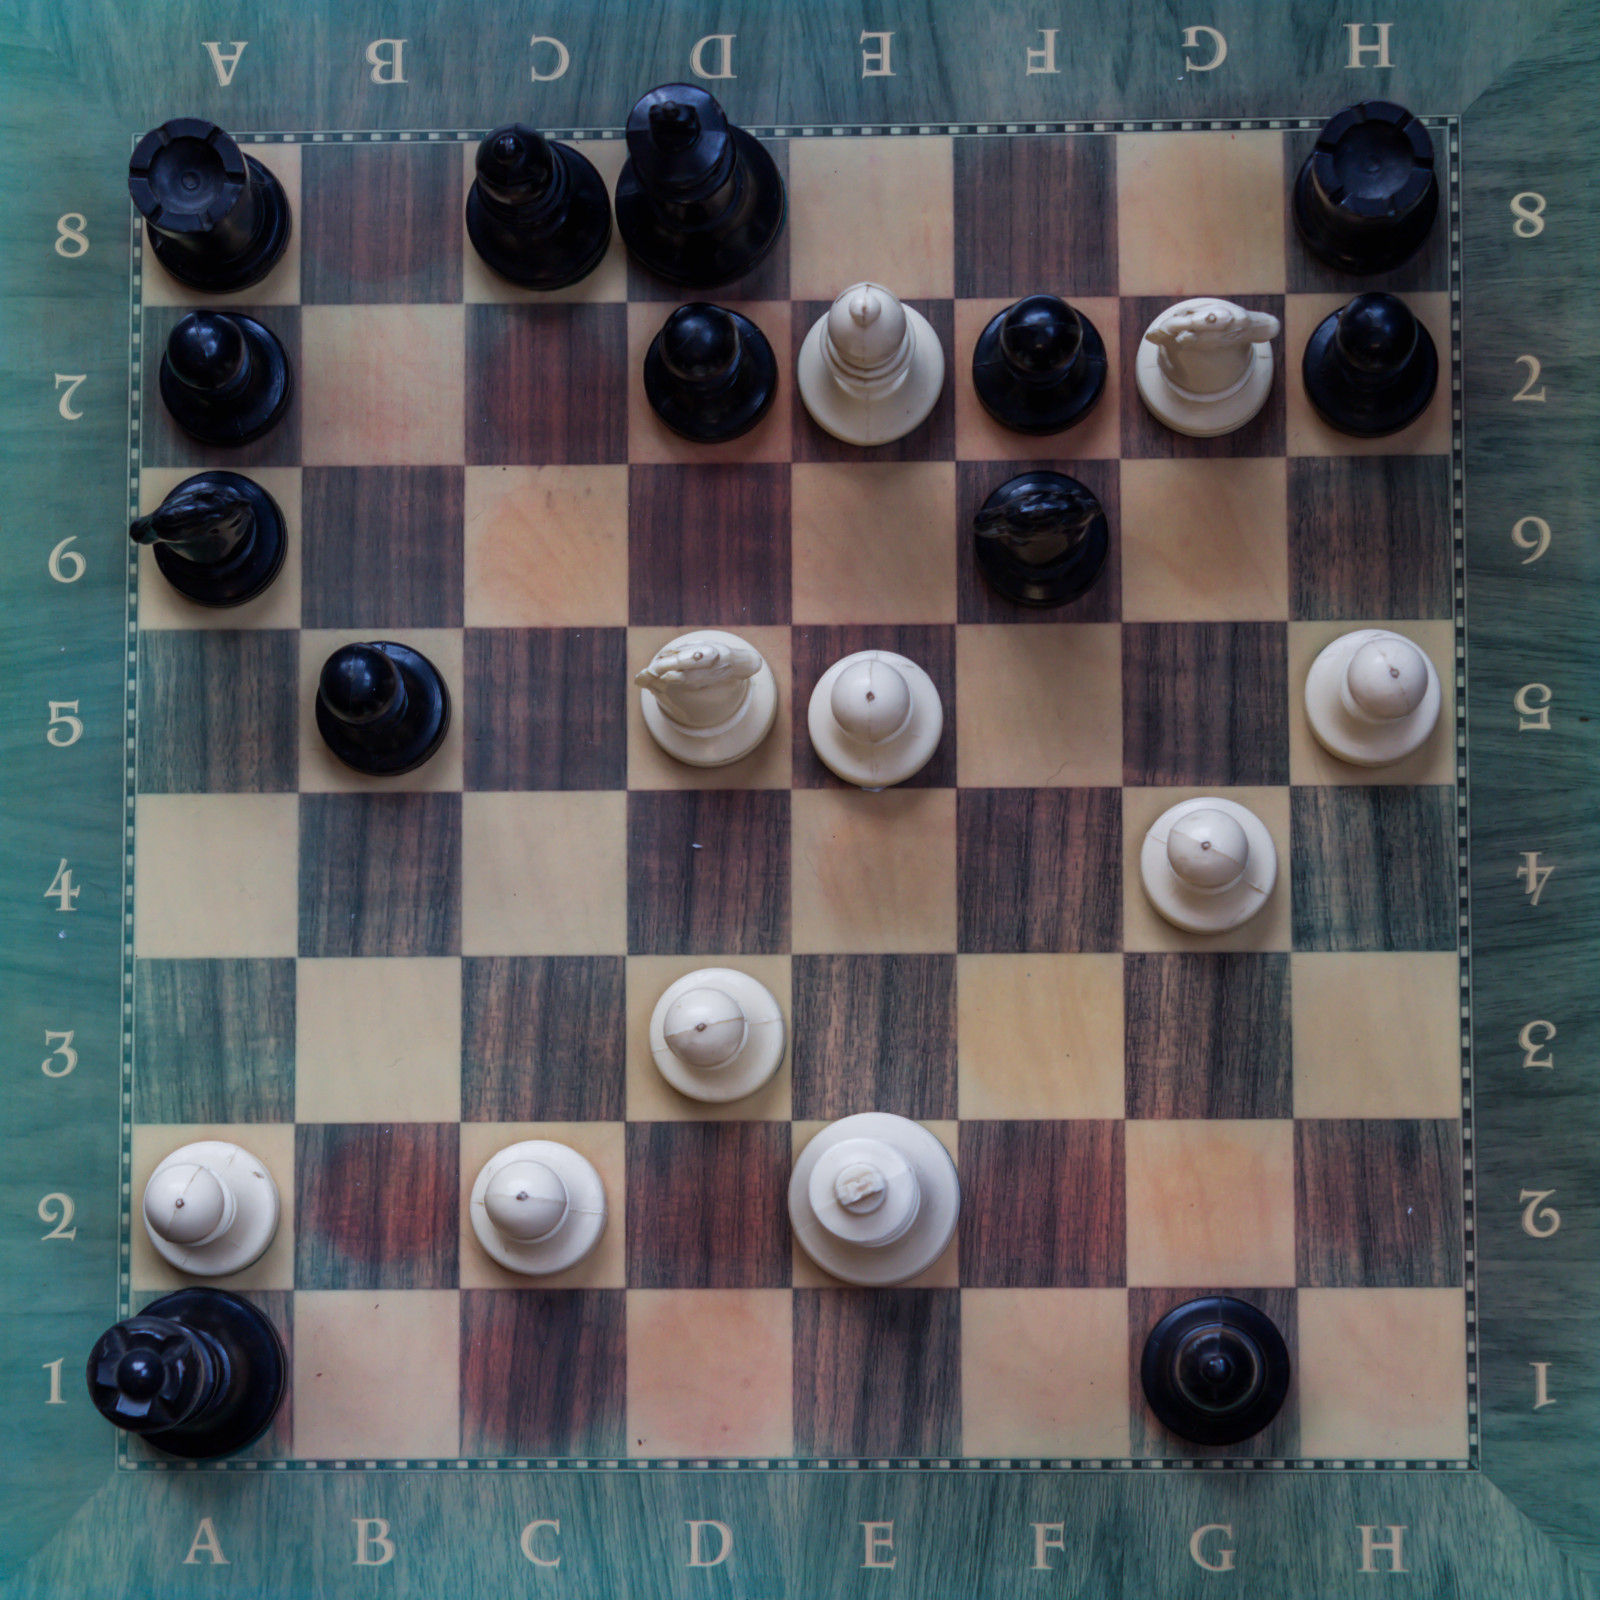 What Is Immortal Game?. What do you get when you combine chess